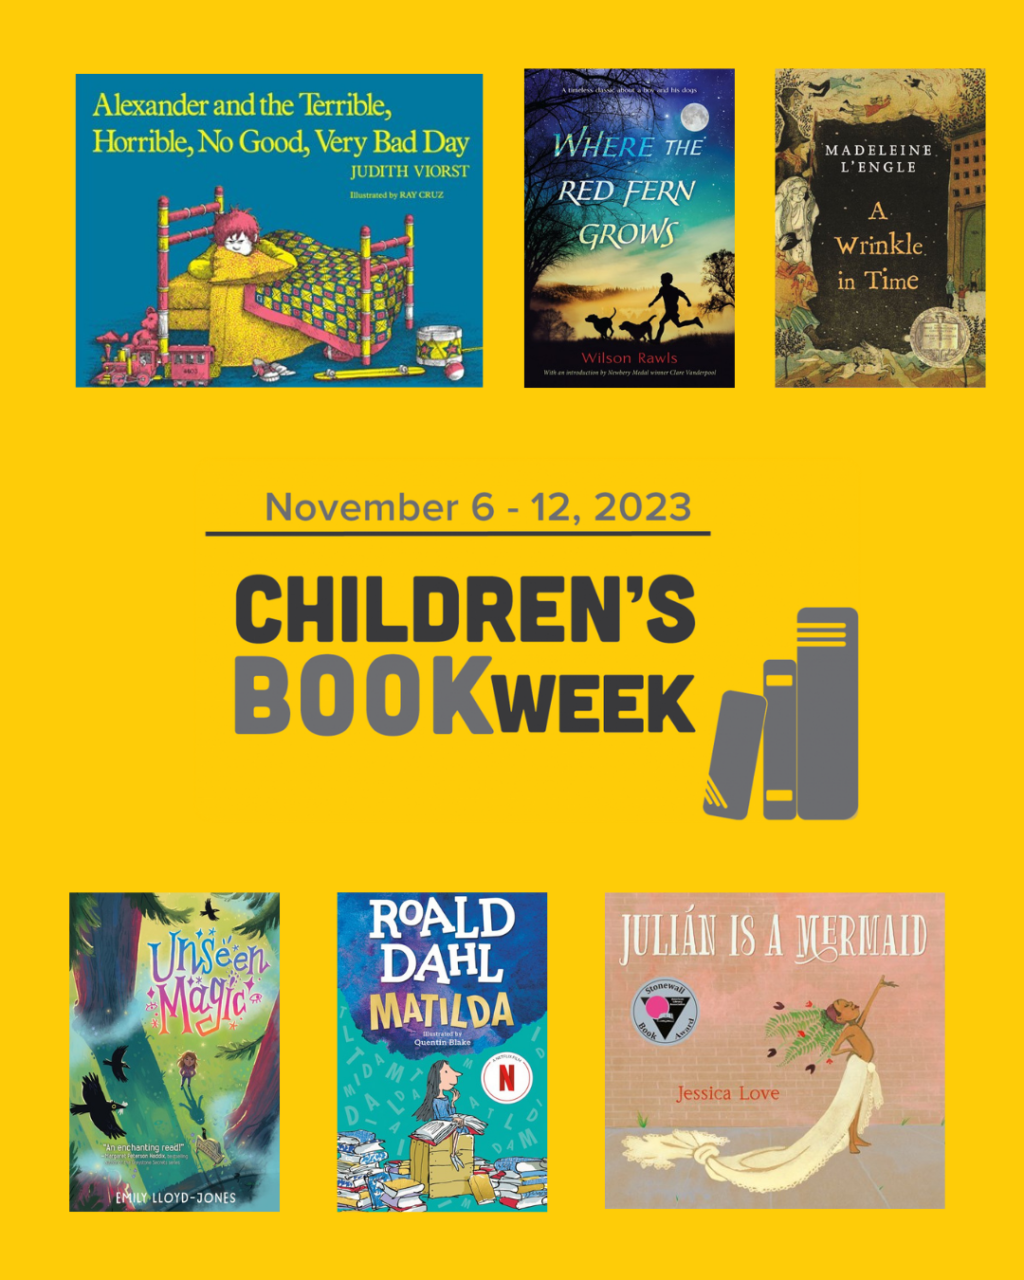 Children's Book Week logo courtesy of Every Child a Reader.